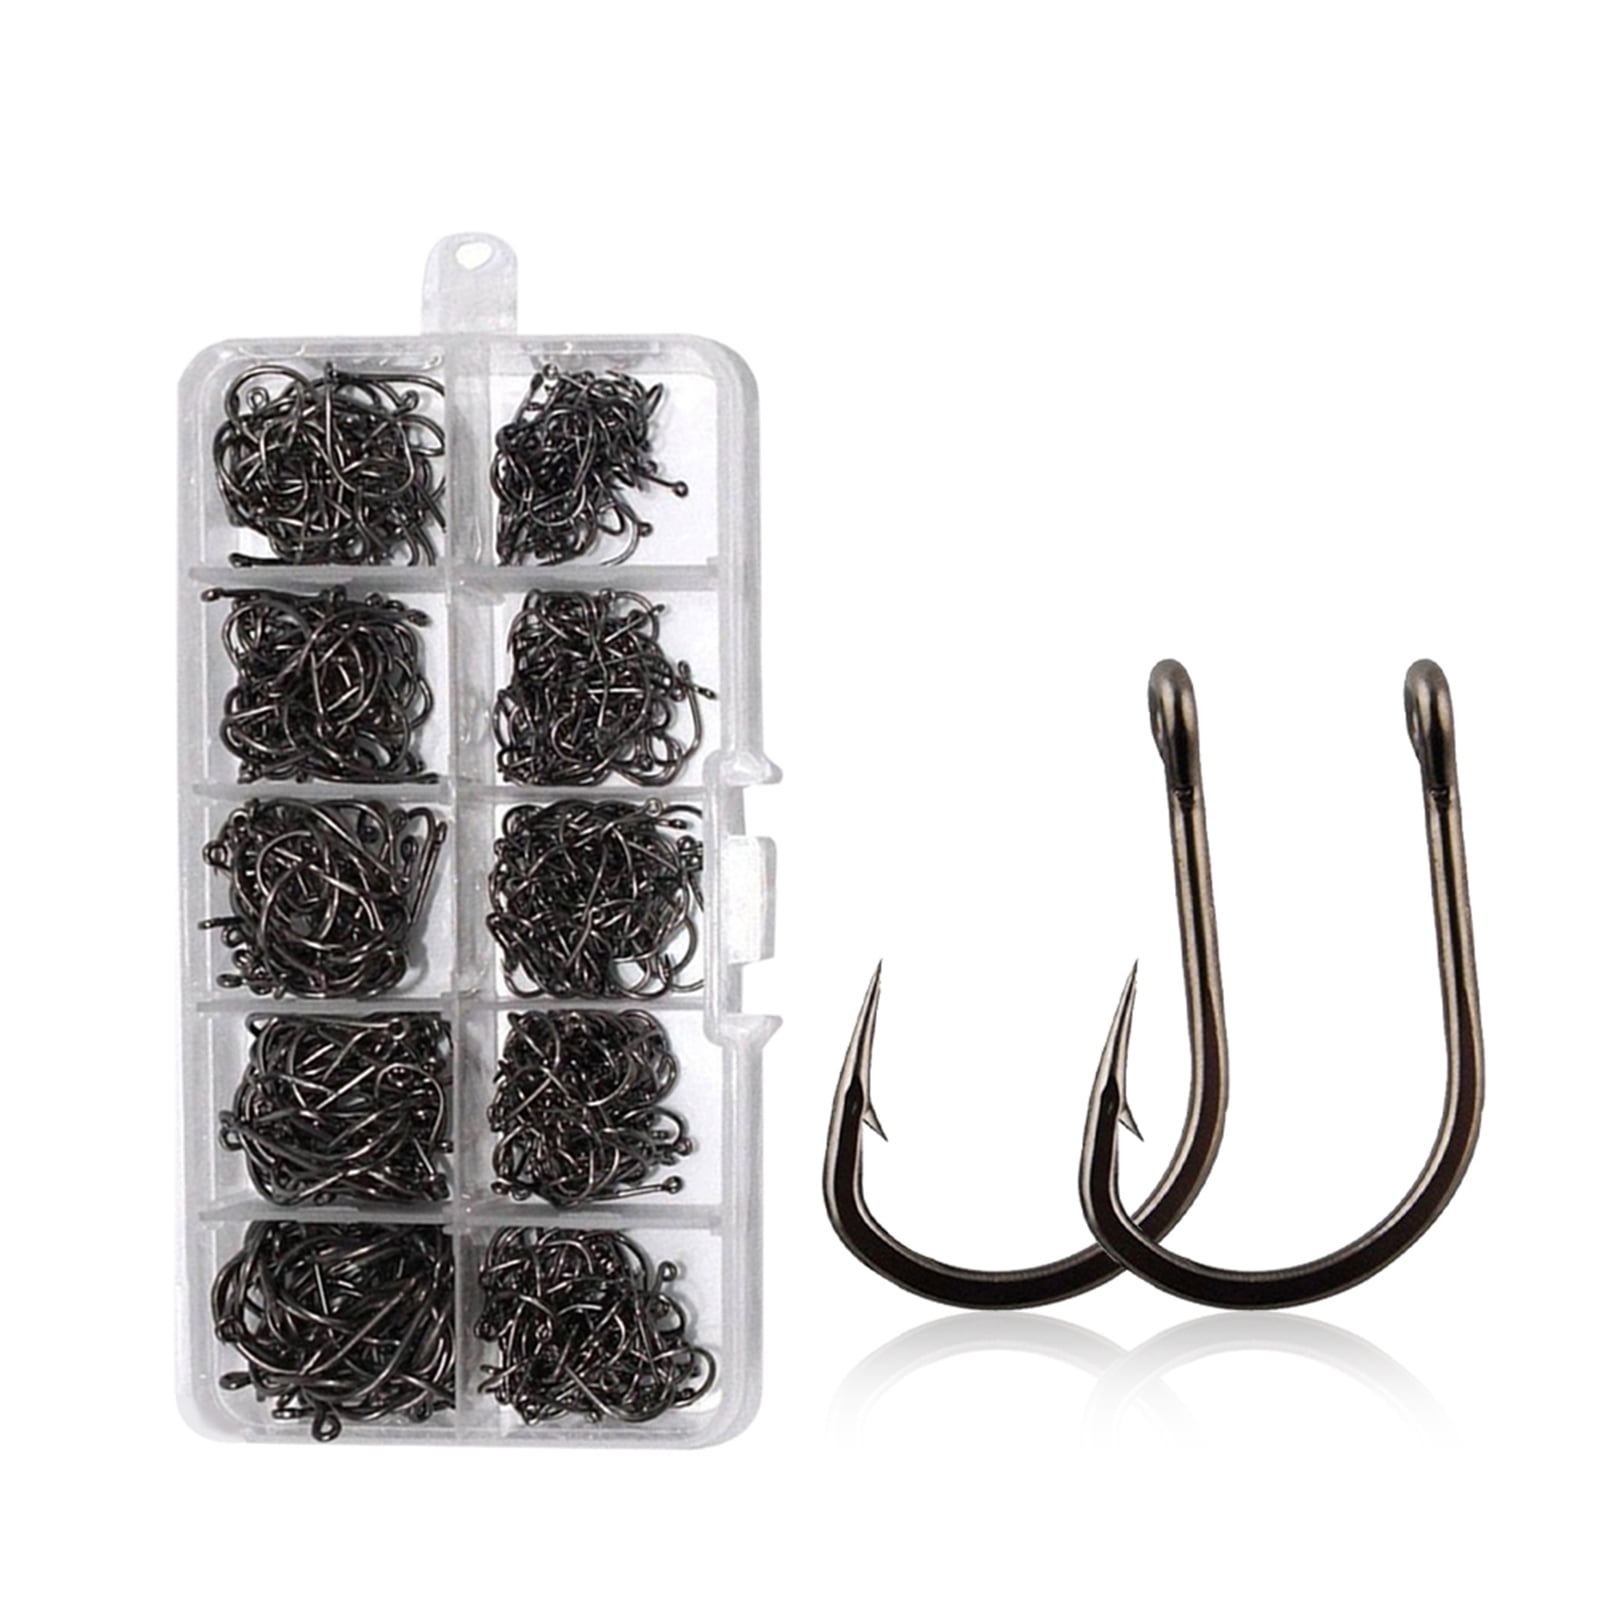 100pcs Fishing Hook Sharpened High Carbon Steel Fish Hooks With Box Tools Sports 